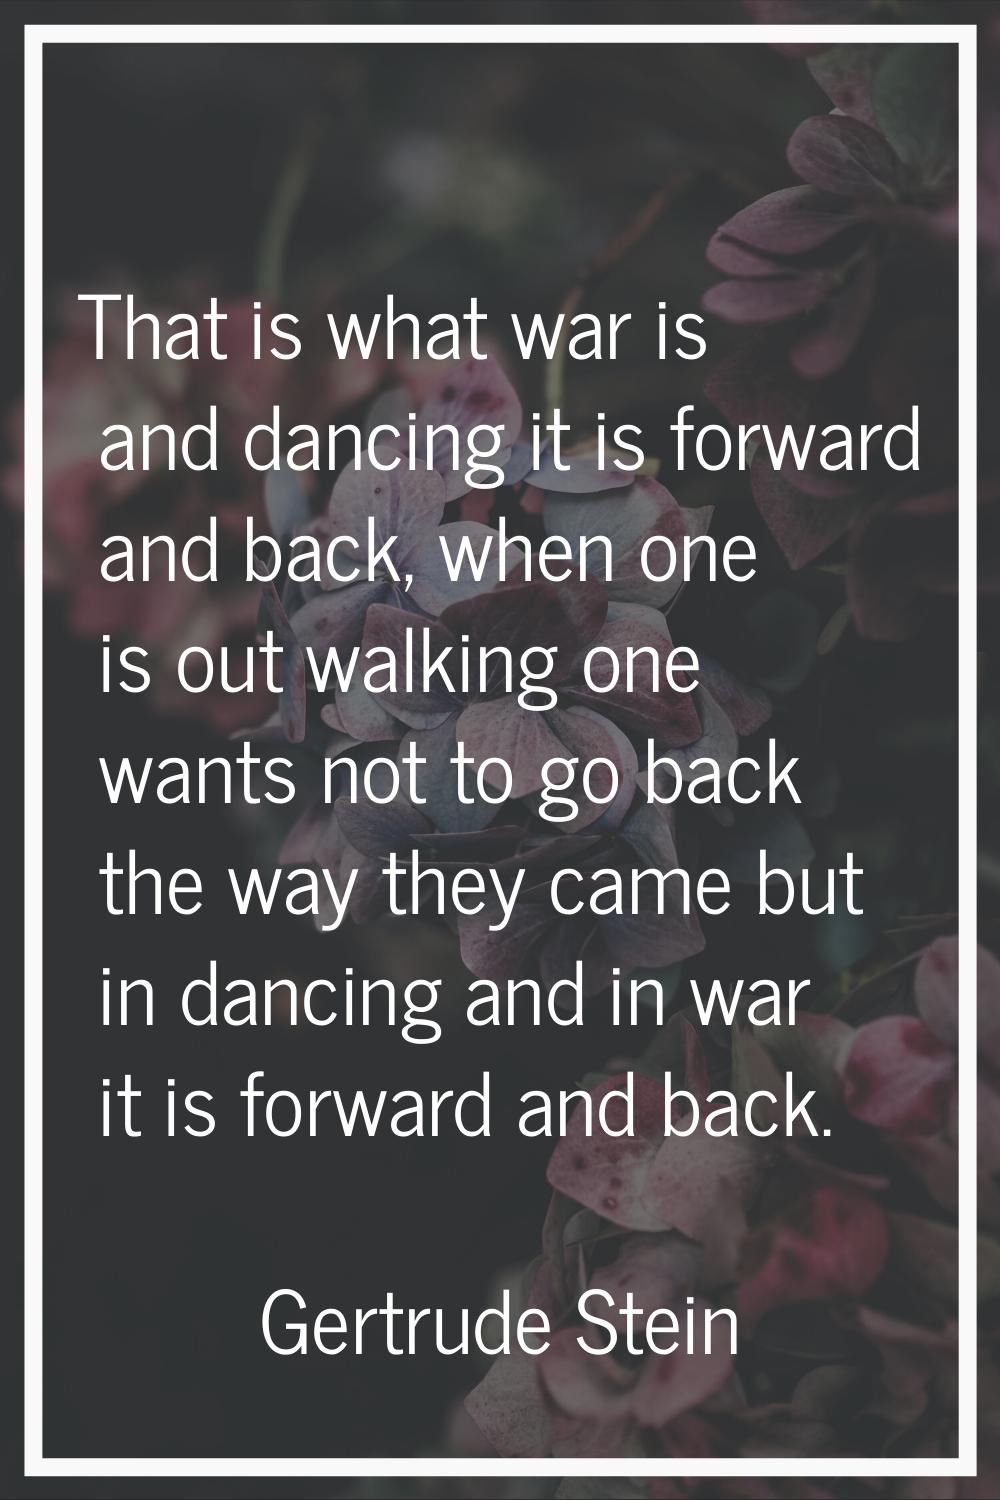 That is what war is and dancing it is forward and back, when one is out walking one wants not to go